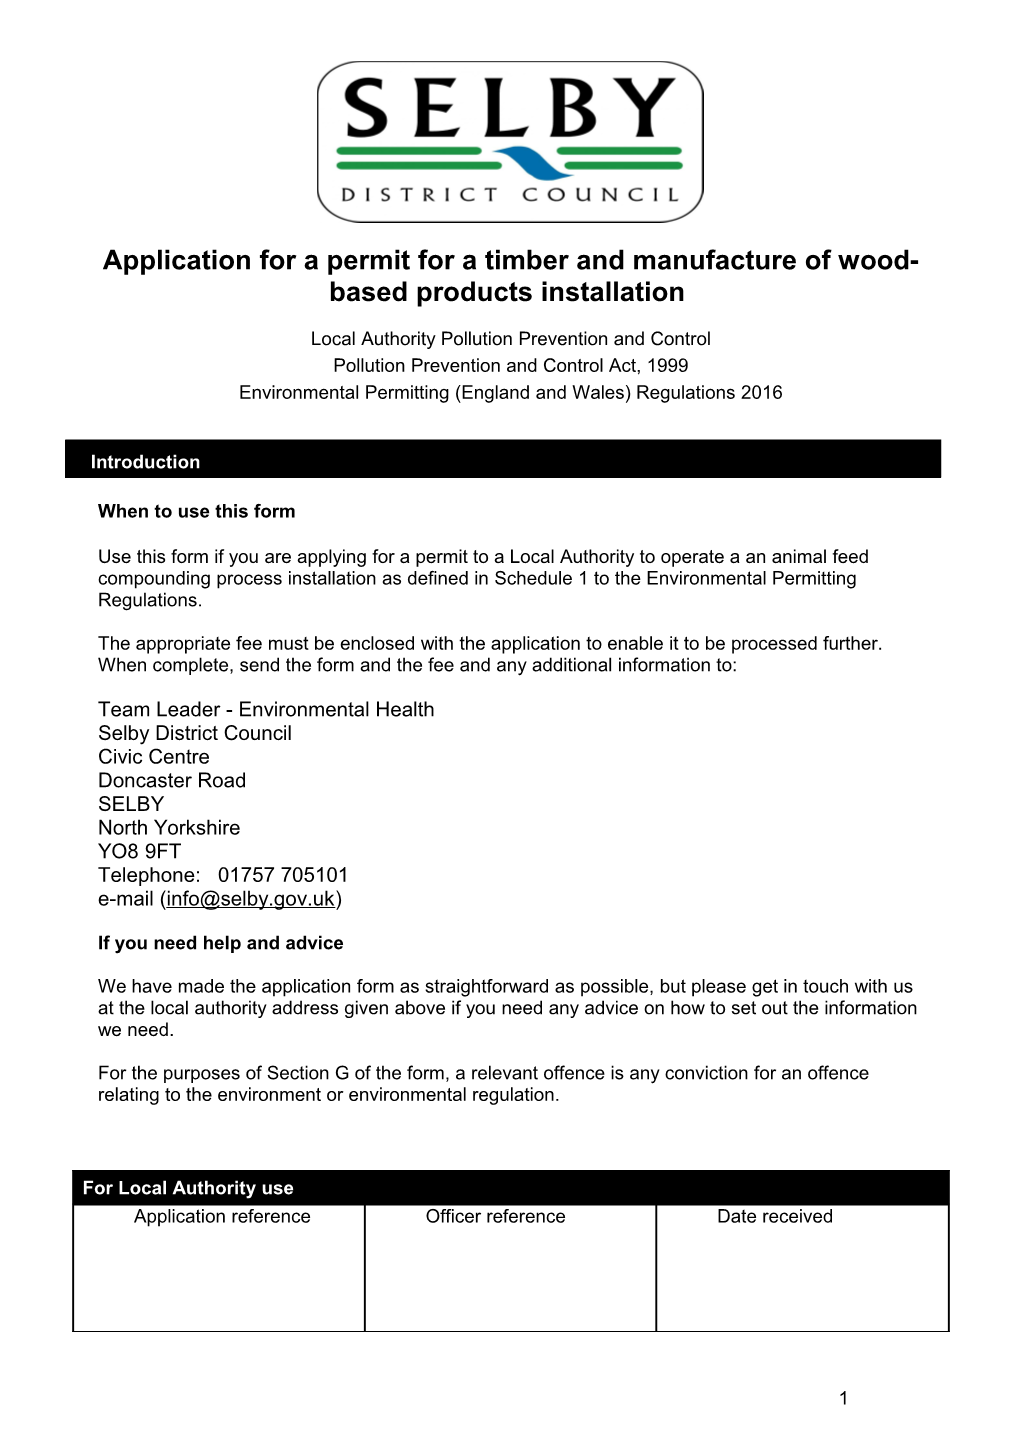 Application for a Permit for a Timber and Manufacture of Wood-Based Products Installation